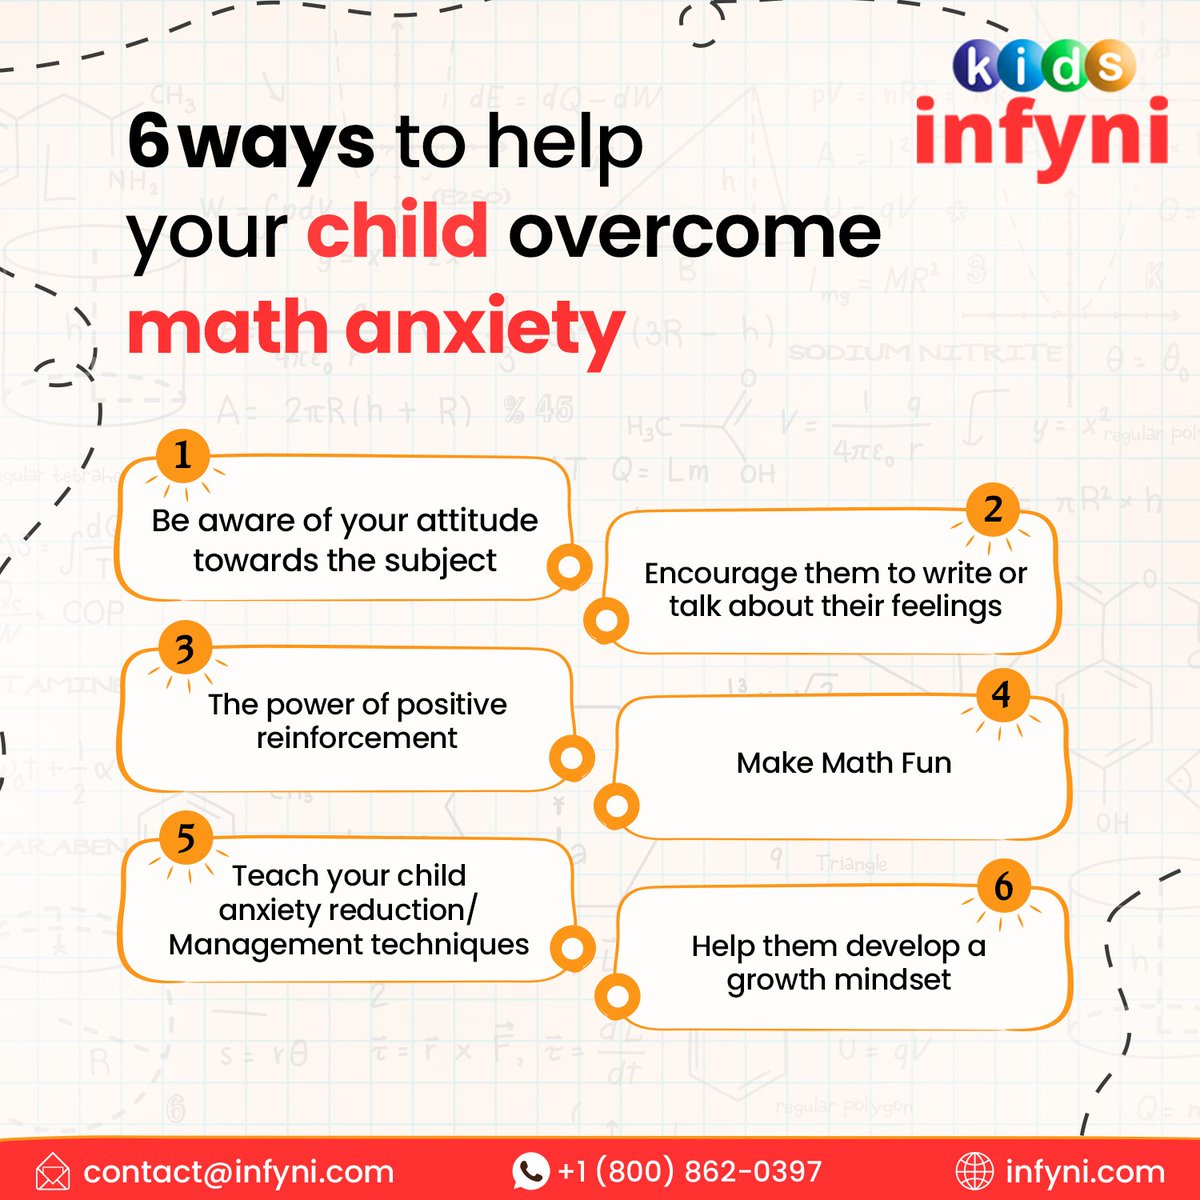 Ease your child's math worries with Infynikids.com supportive strategies and friendly learning environment

#infyni #infynikids #maths #mathsisfun #mathstutor #mathskills #mathematics #onlinecourses #Onlinecoursesforkids #onlineclasses #Onlineclassesforkids